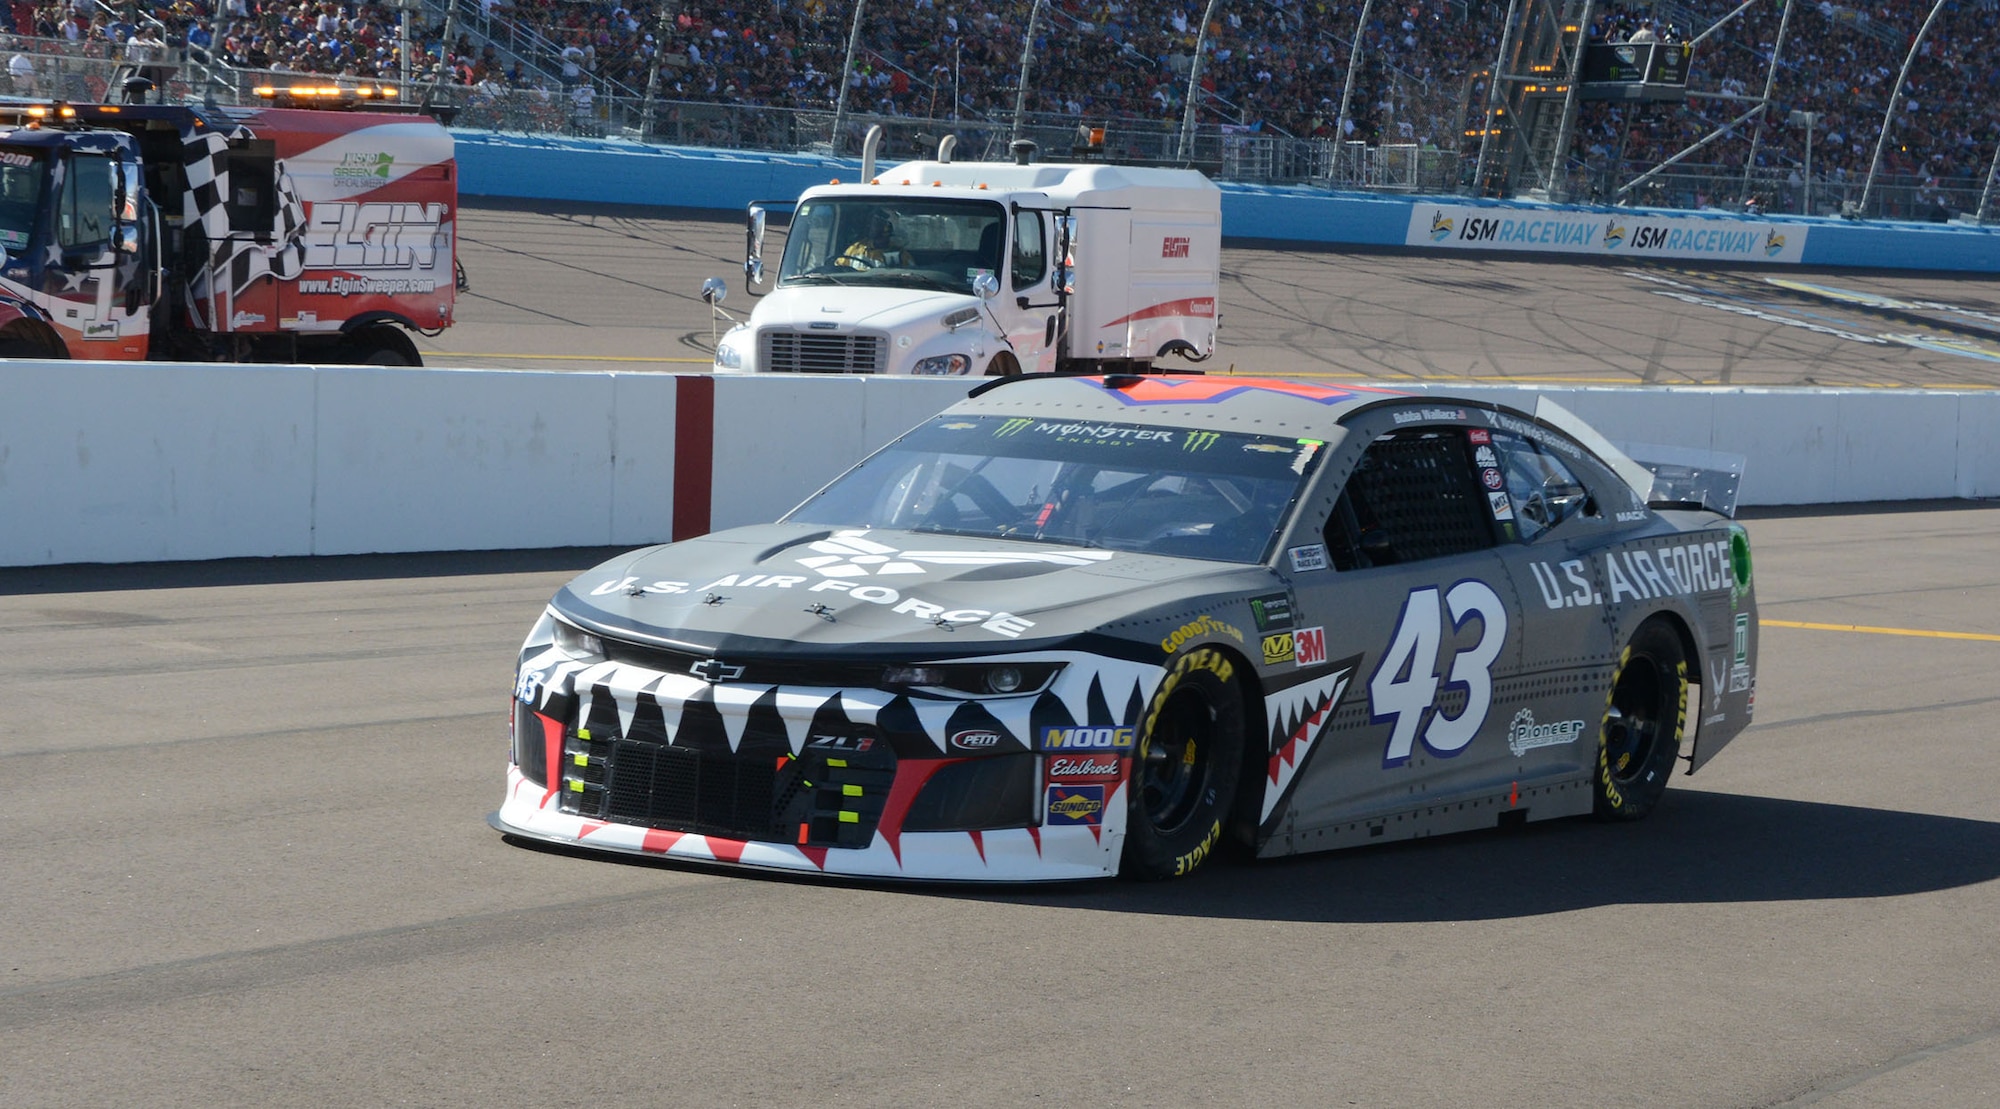 The No. 43 Richard Petty Motorsports race car, driven by Bubba Wallace, took on the A-10 Warthog paint scheme for the Veteran's Day weekend NASCAR race in Phoenix